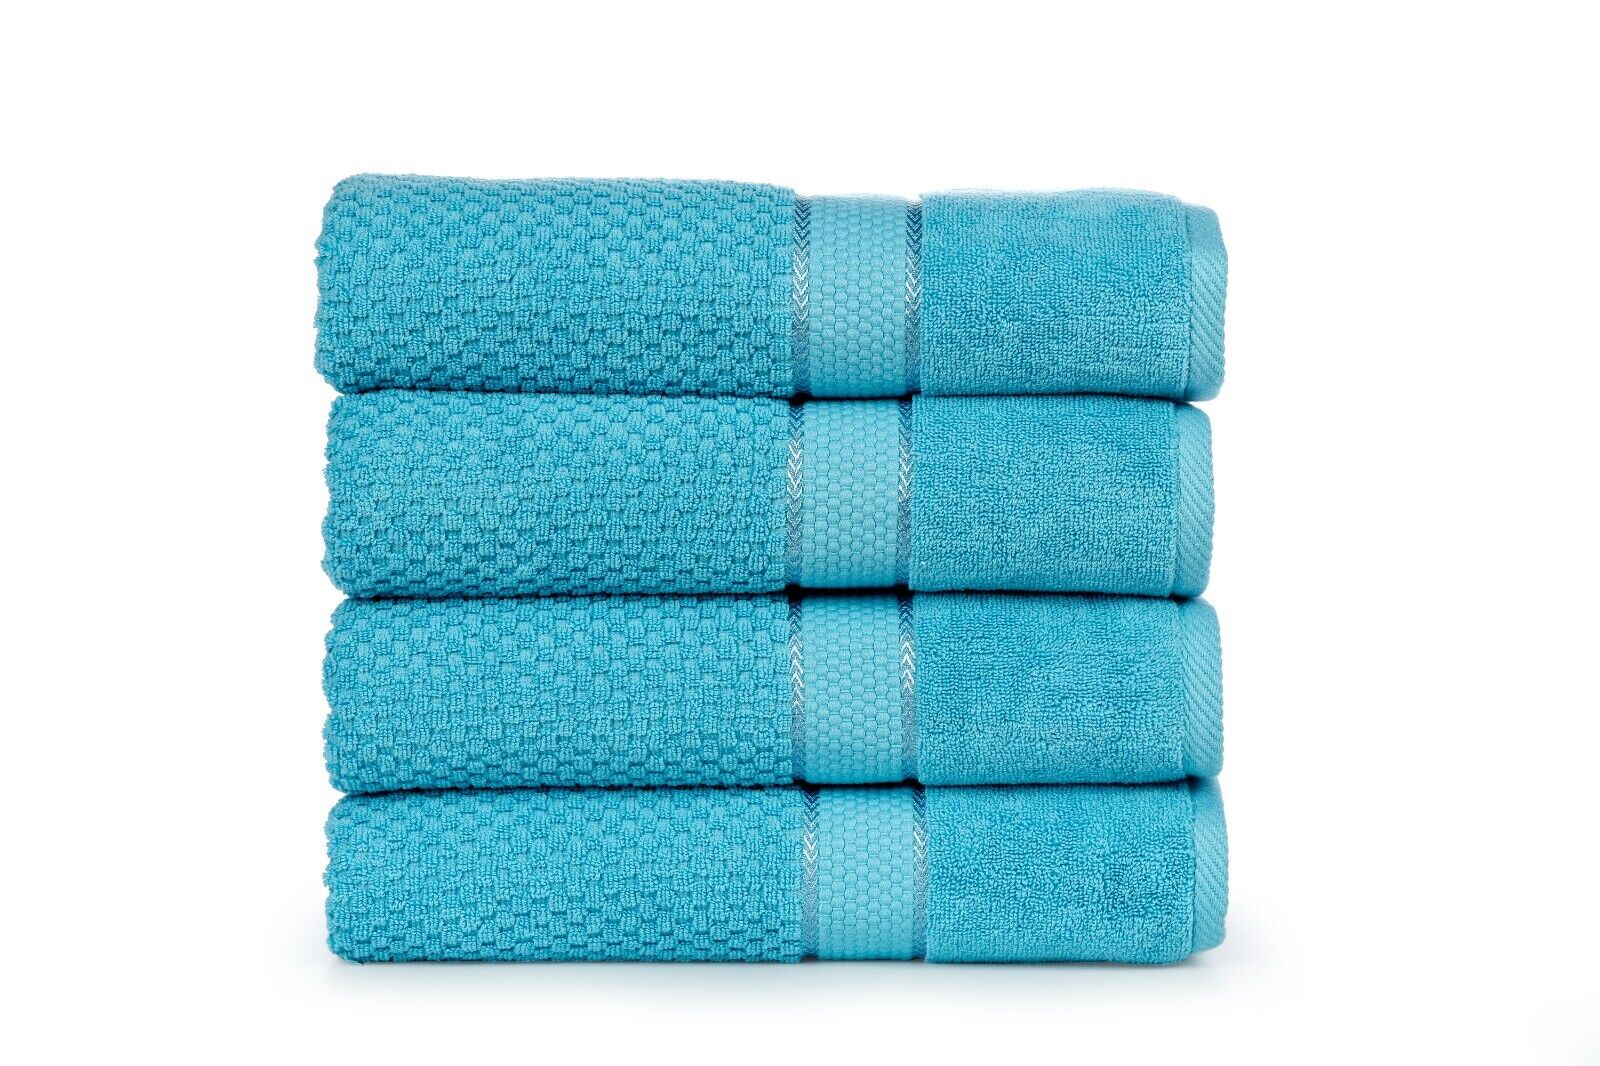 Ample Decor Set of 4 Bath Towel 100% Cotton - Highly Absorbent, Popcorn Textured